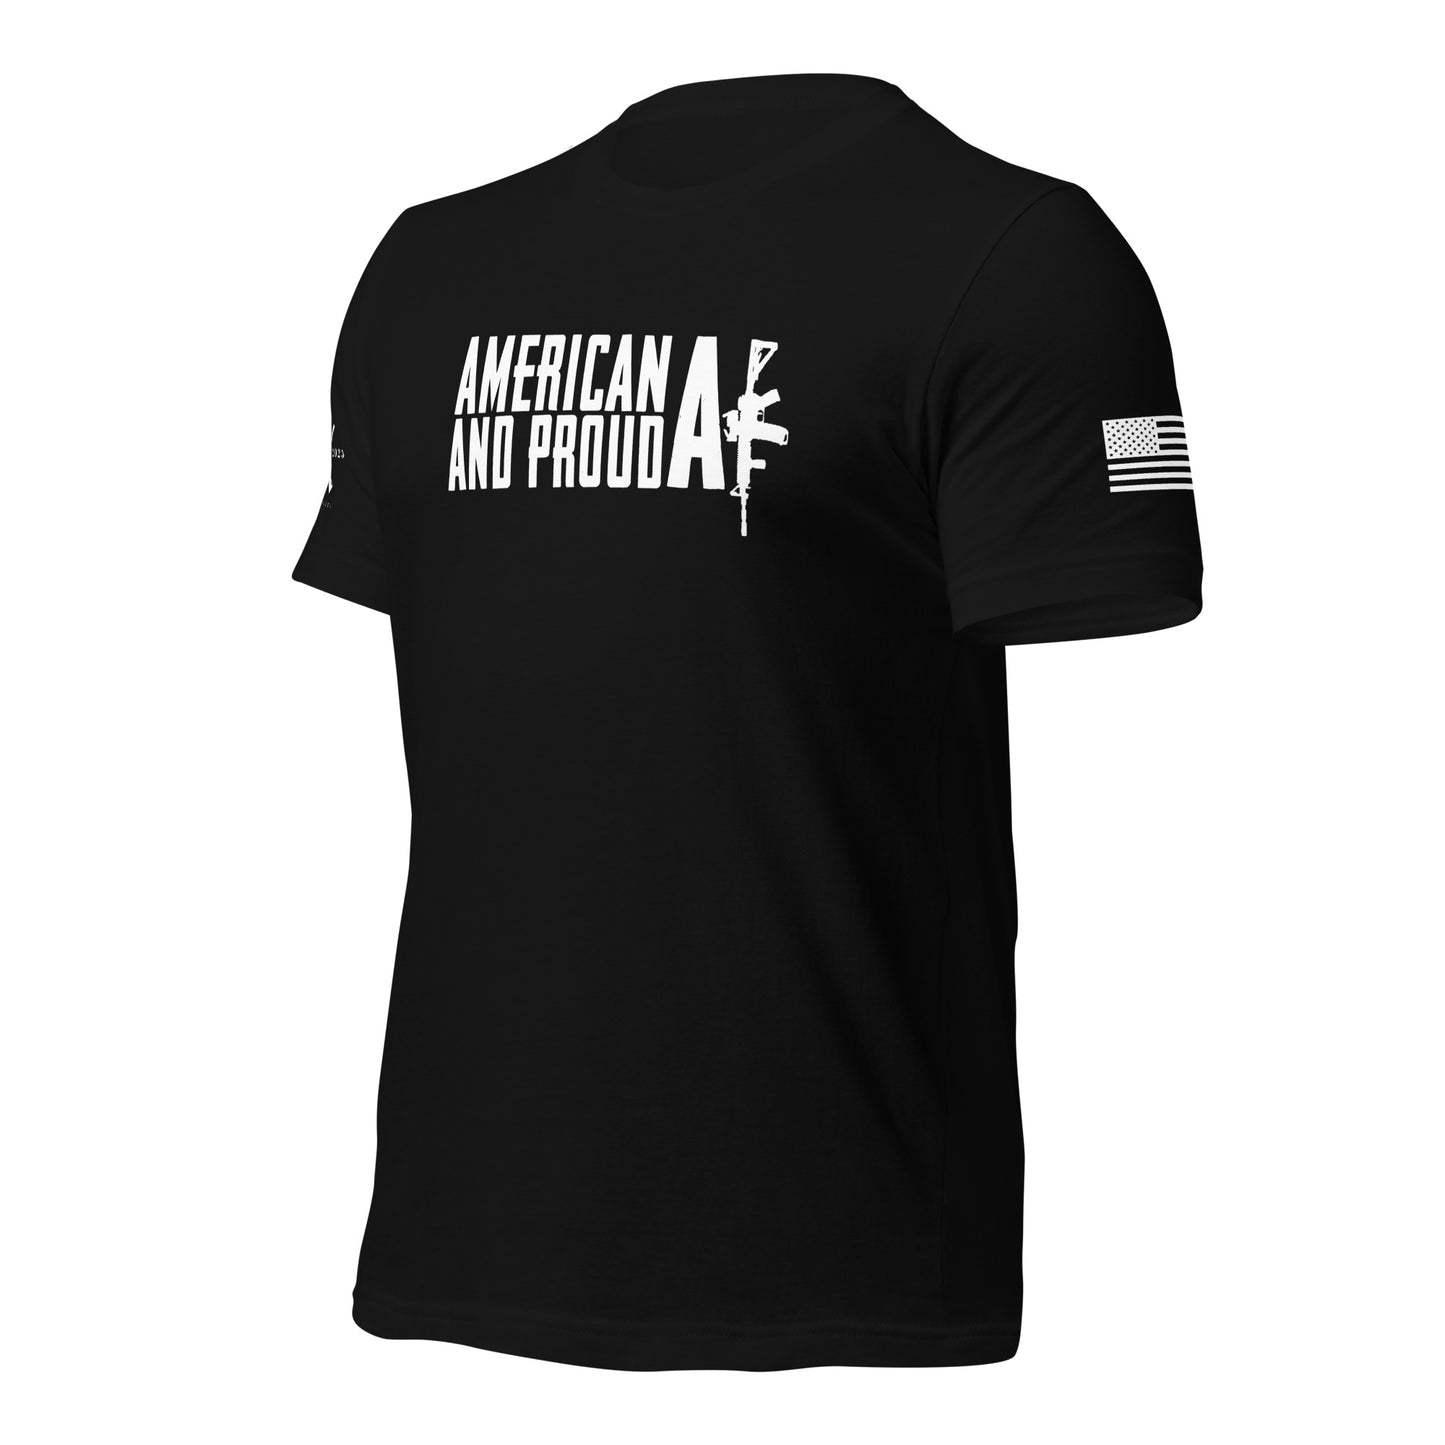 American and ProudAF 2 - men's